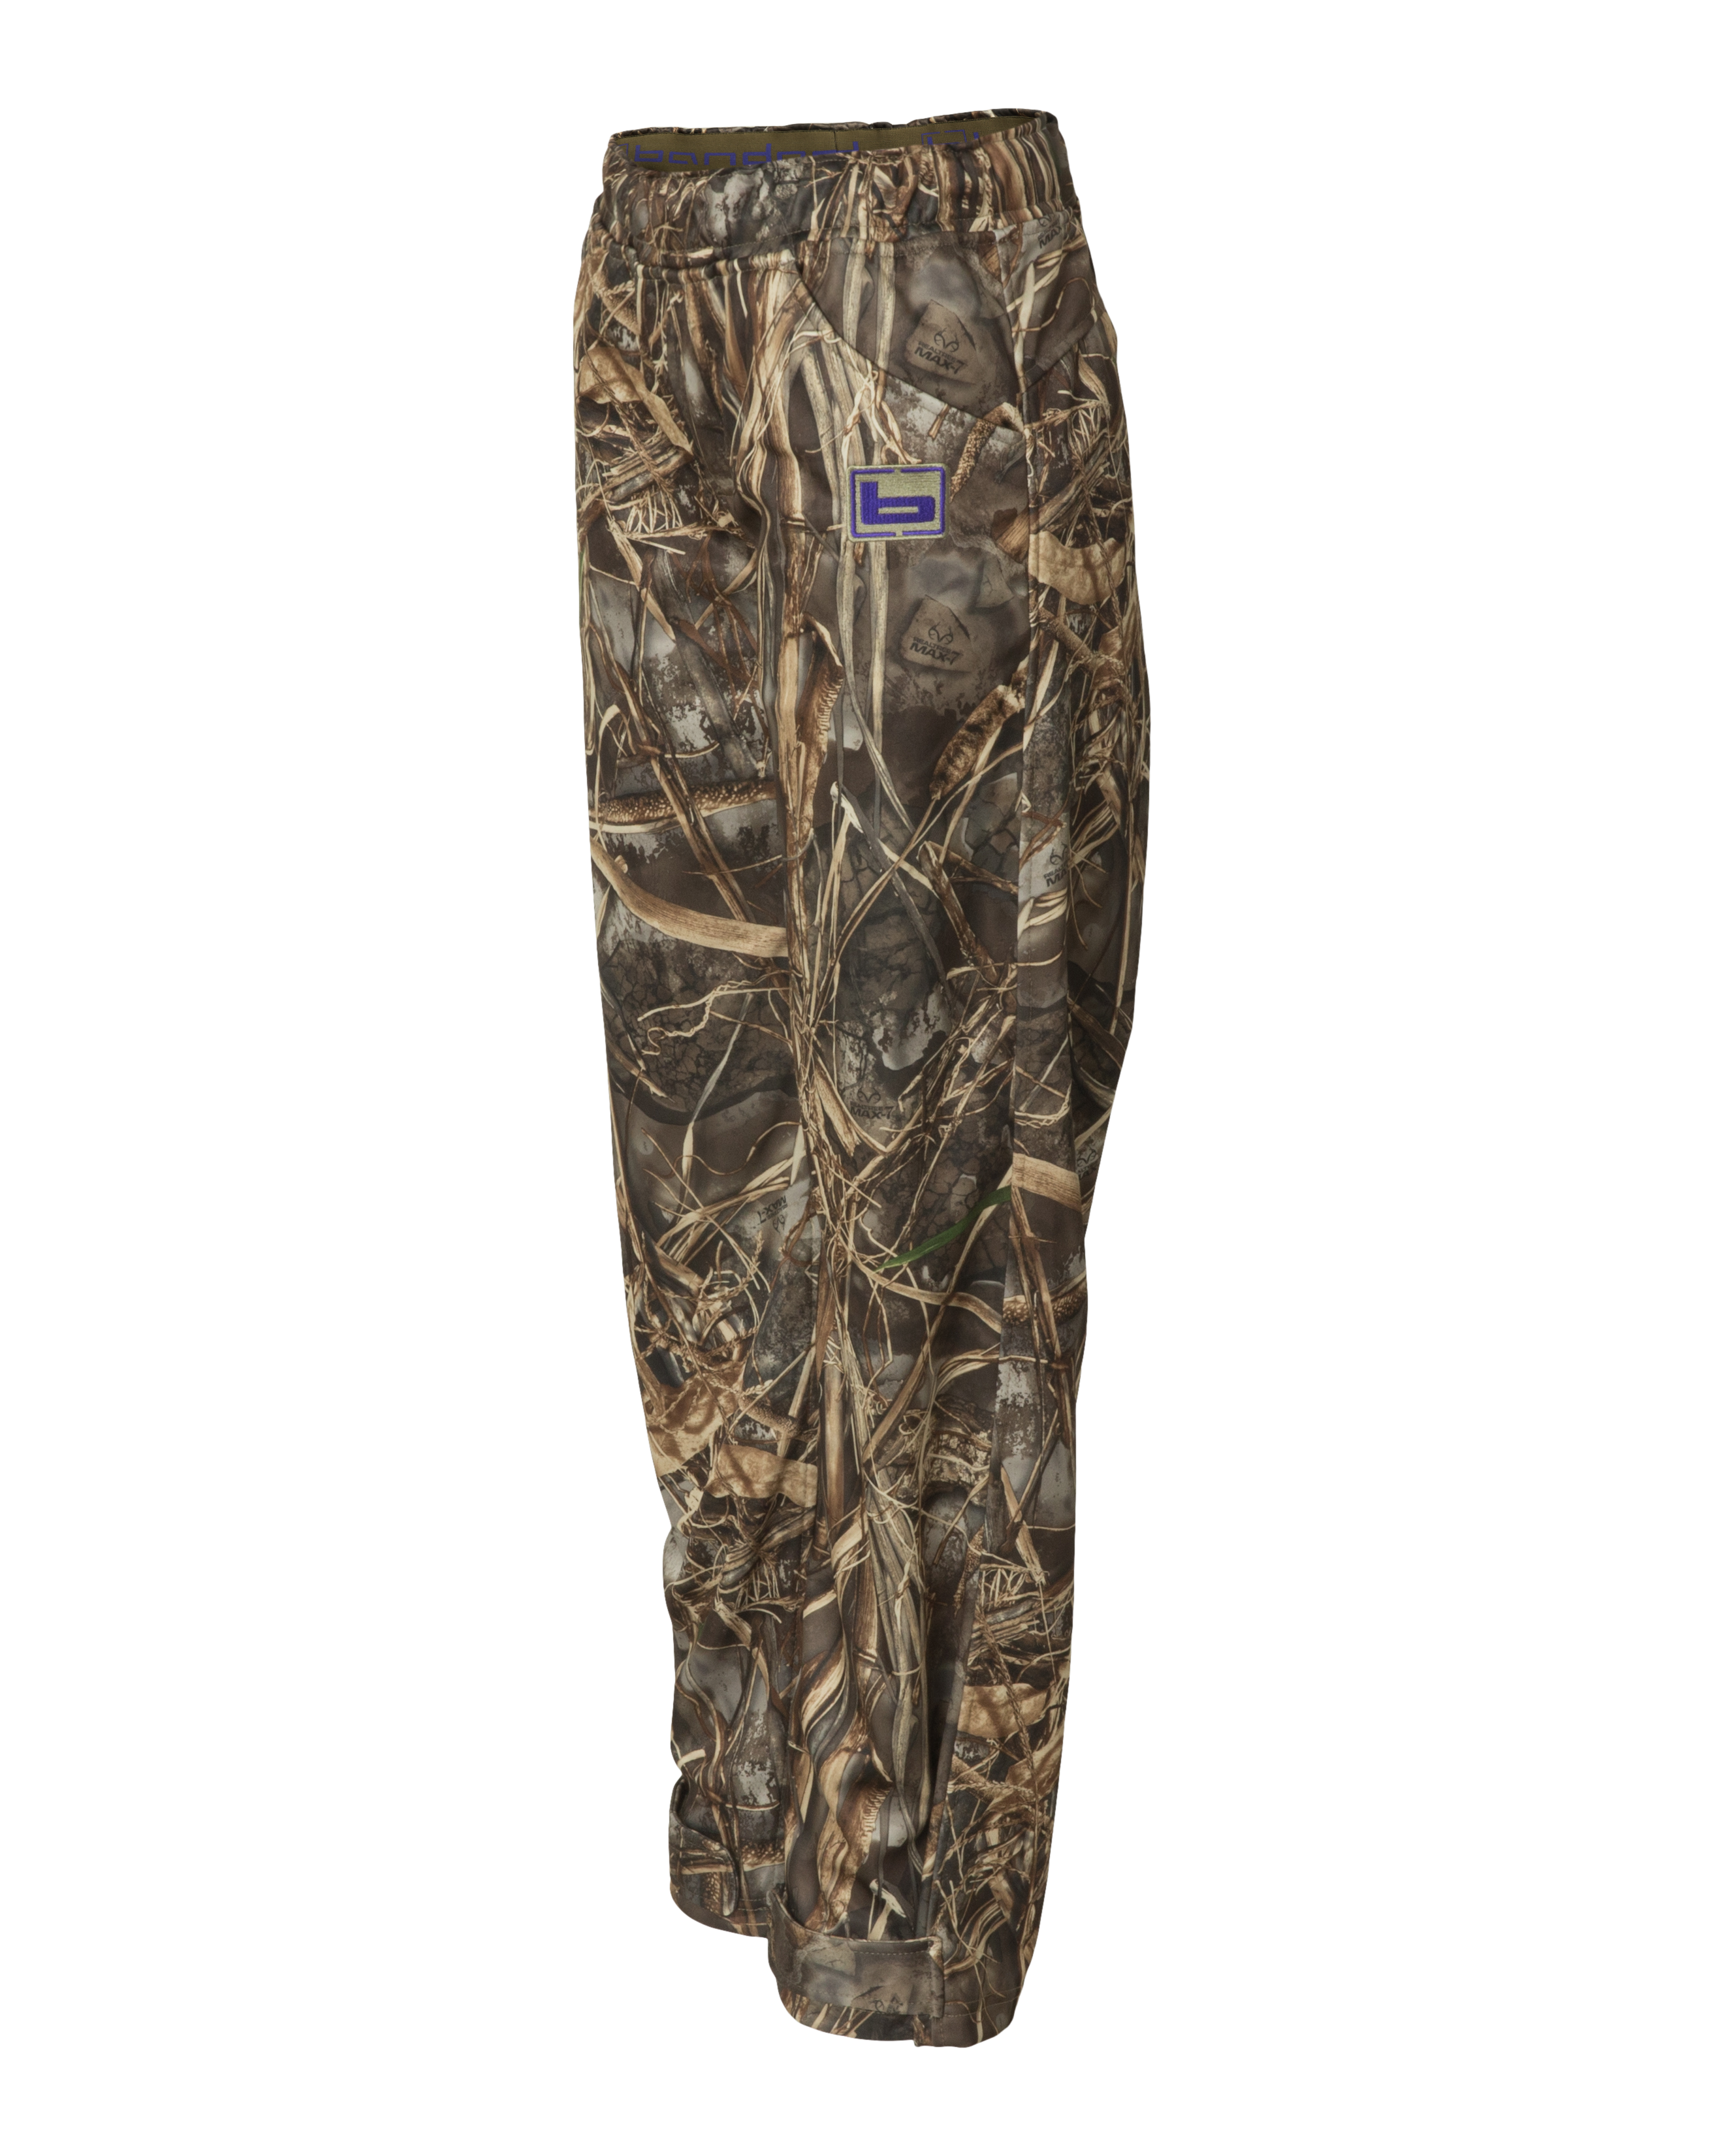 BANDED White River Wader Pants, Uninsulated, Color: Blades, Size: XL (1793)  - Walmart.com